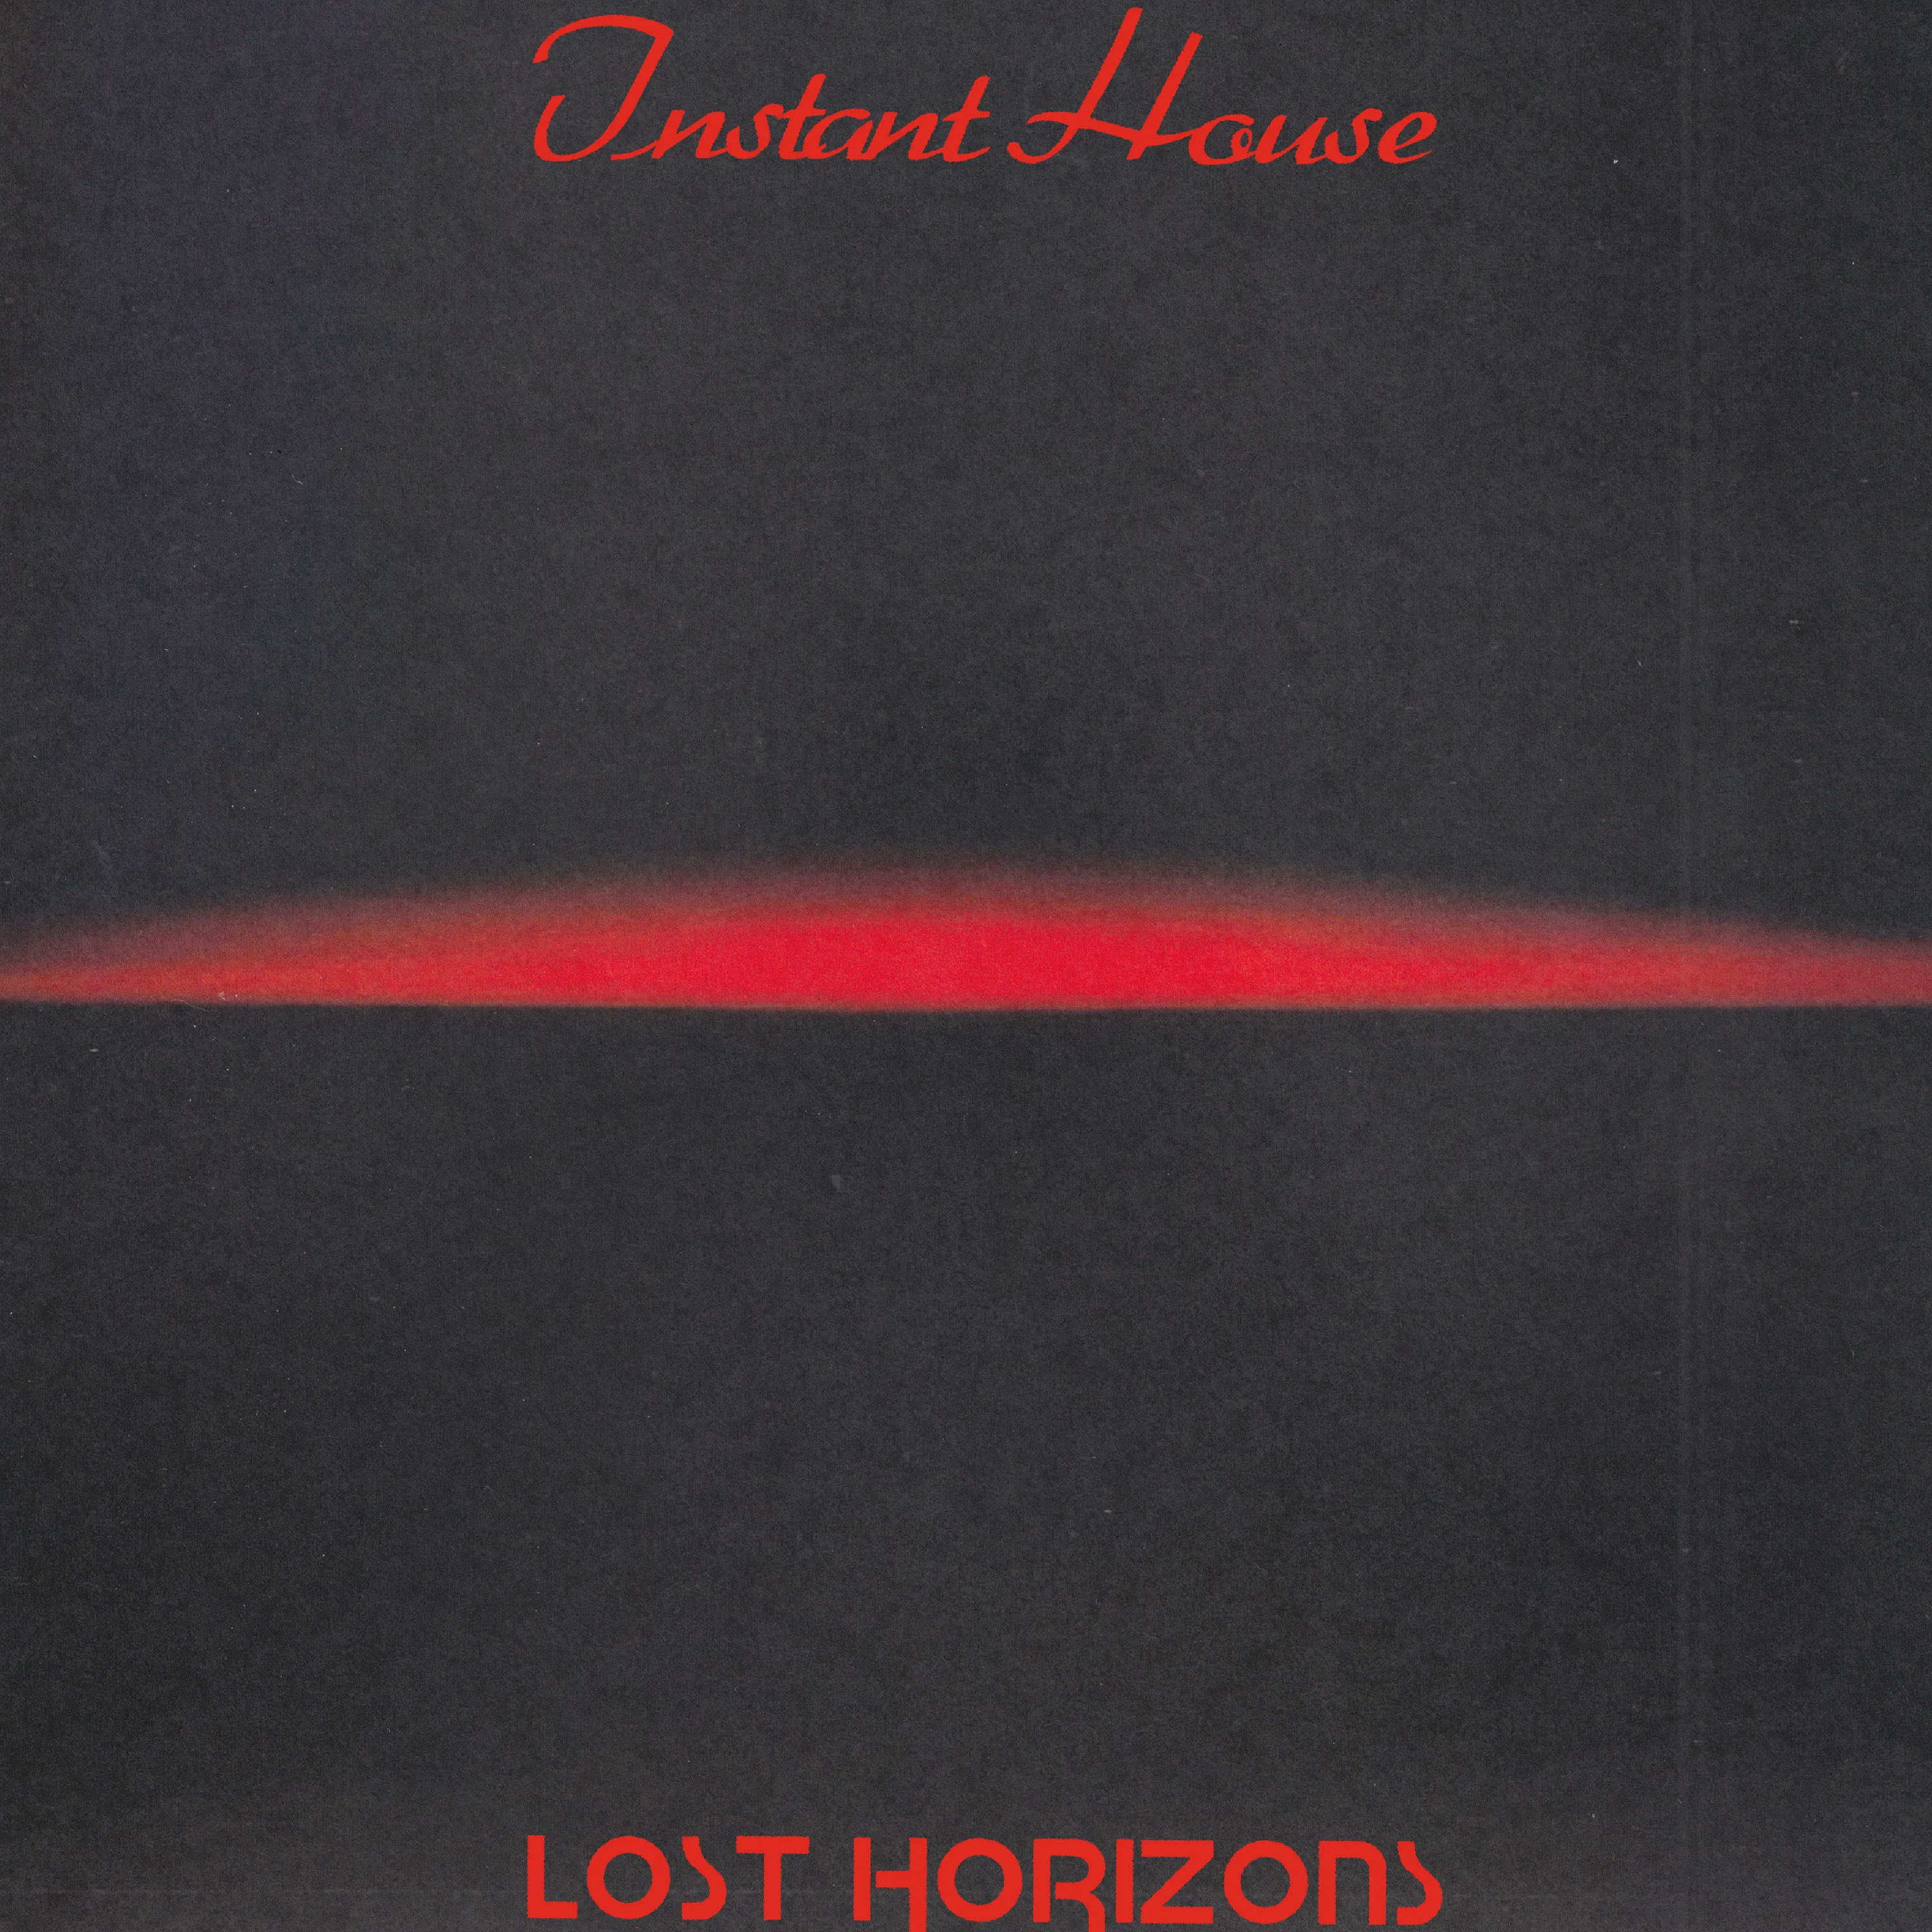 INSTANT HOUSE - Lost Horizons : 12inch